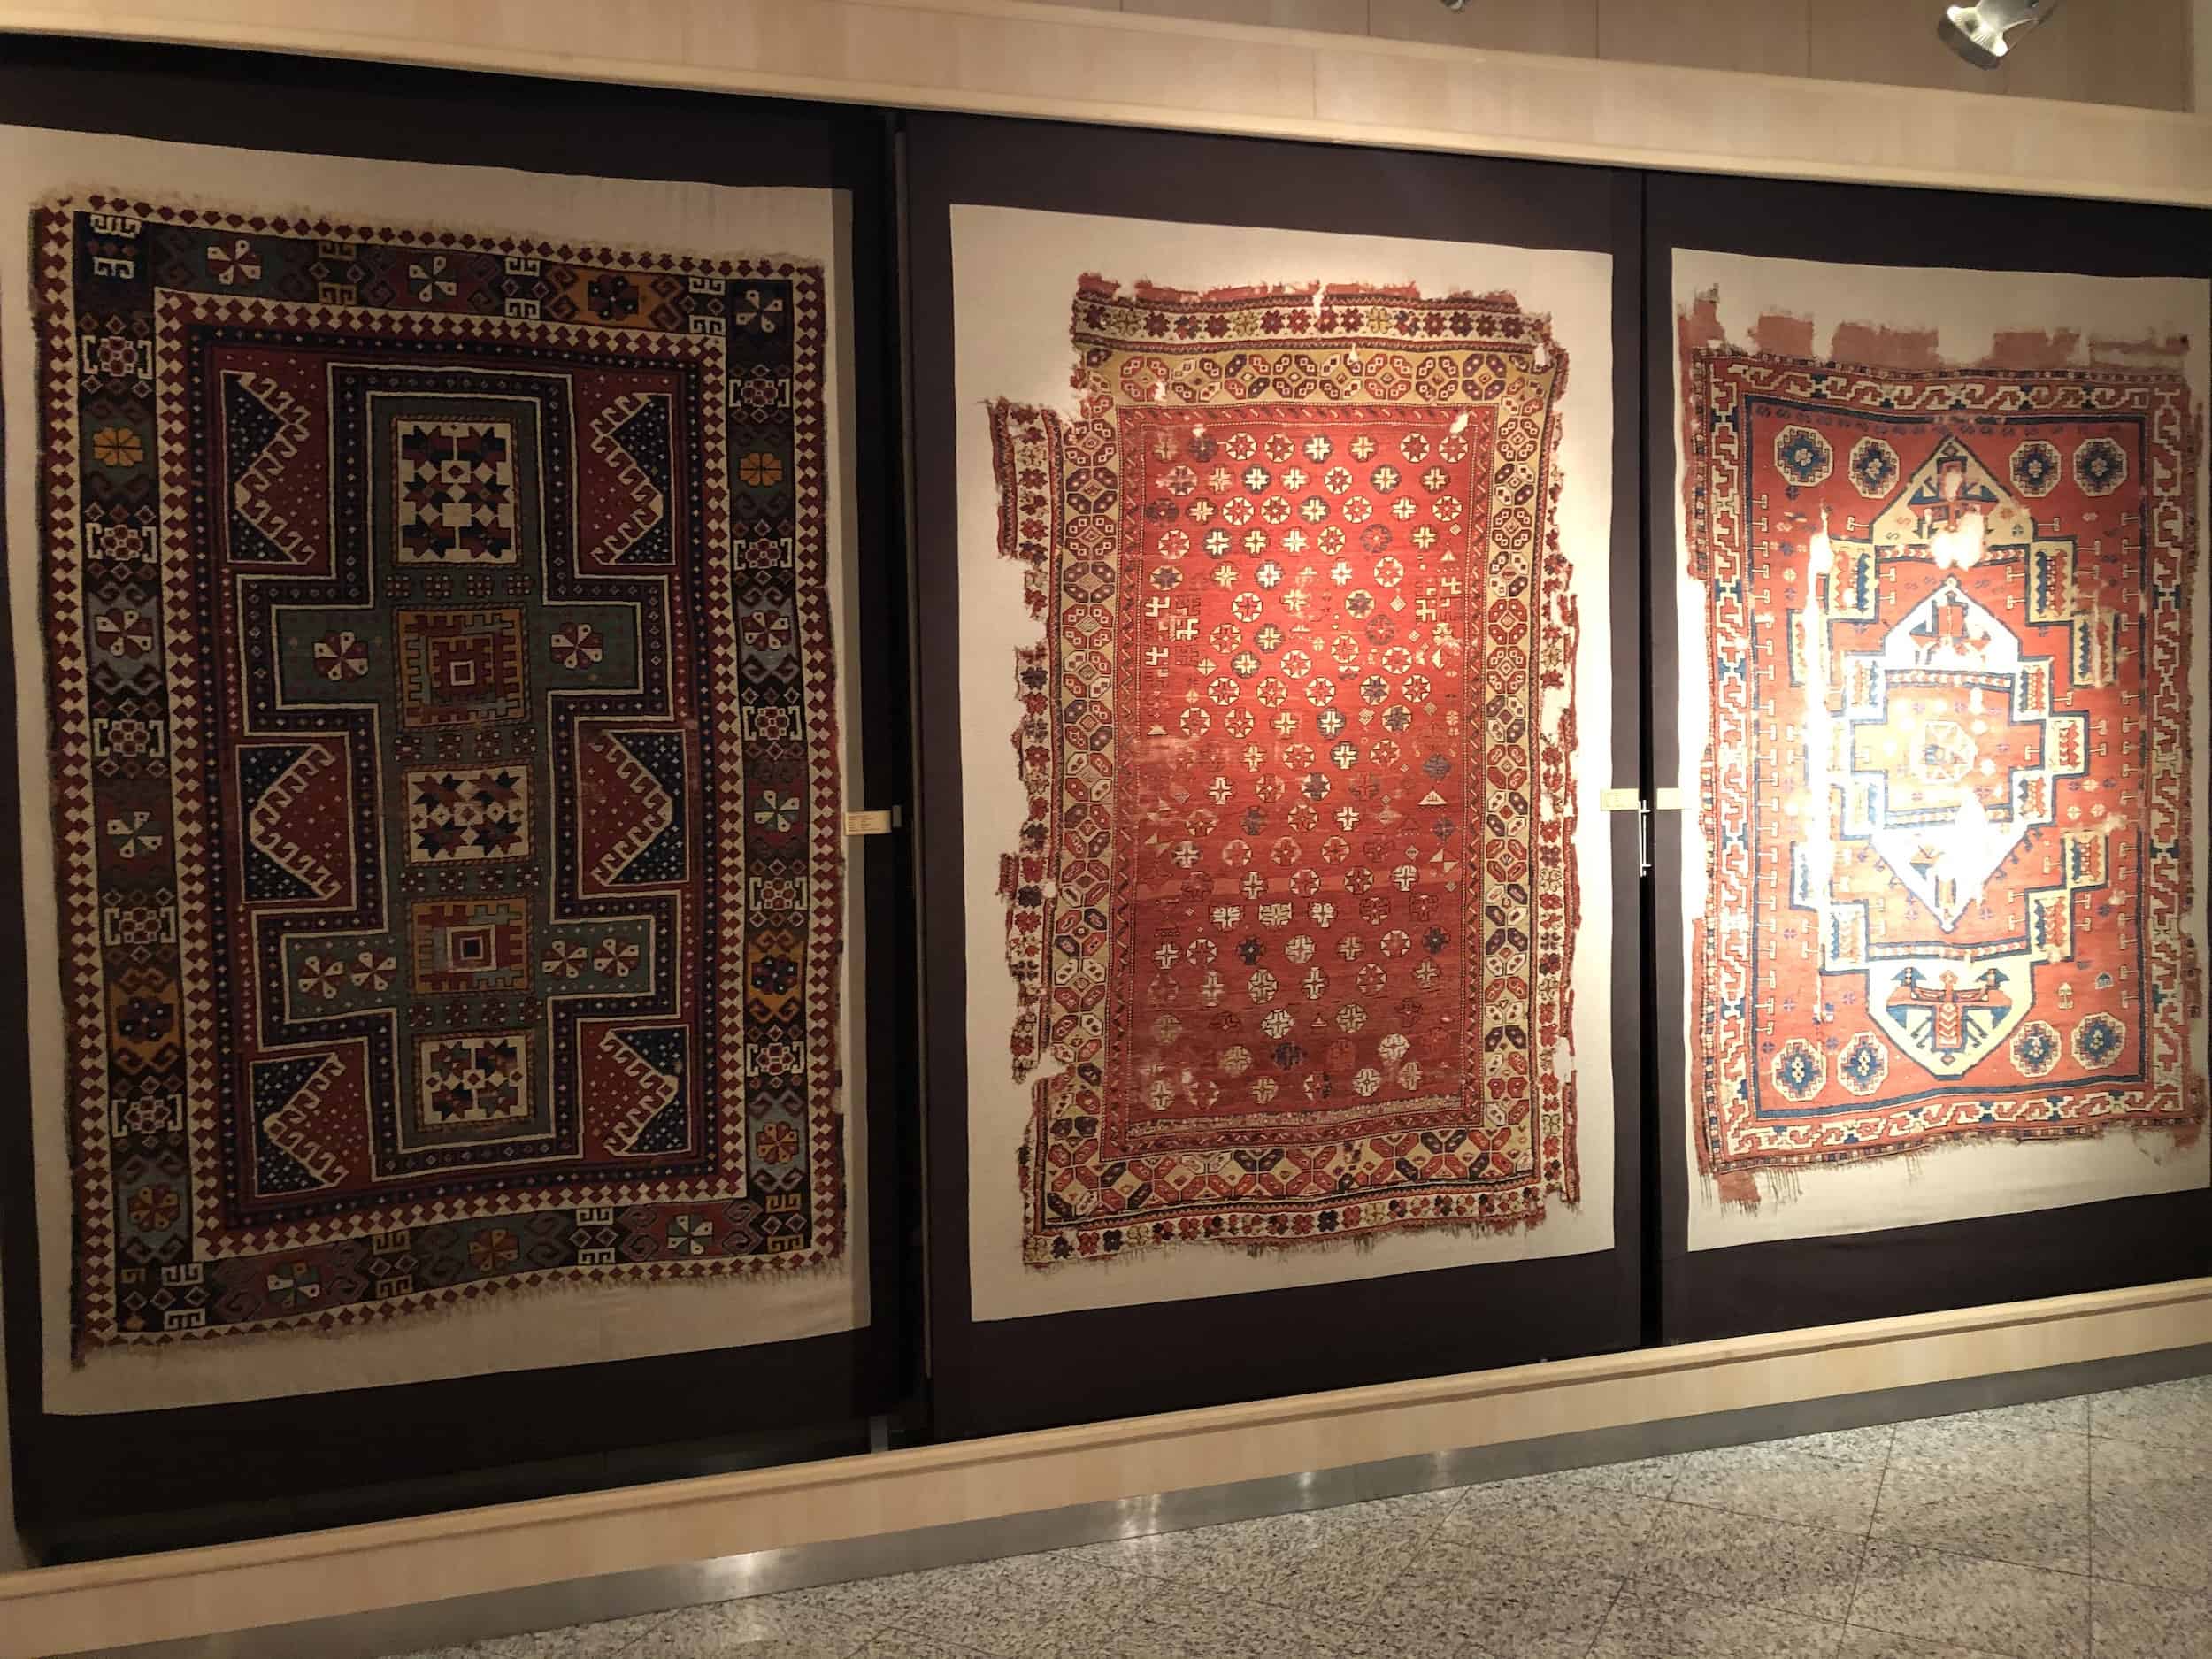 Carpets at the Foundation Works Museum in Ankara, Turkey